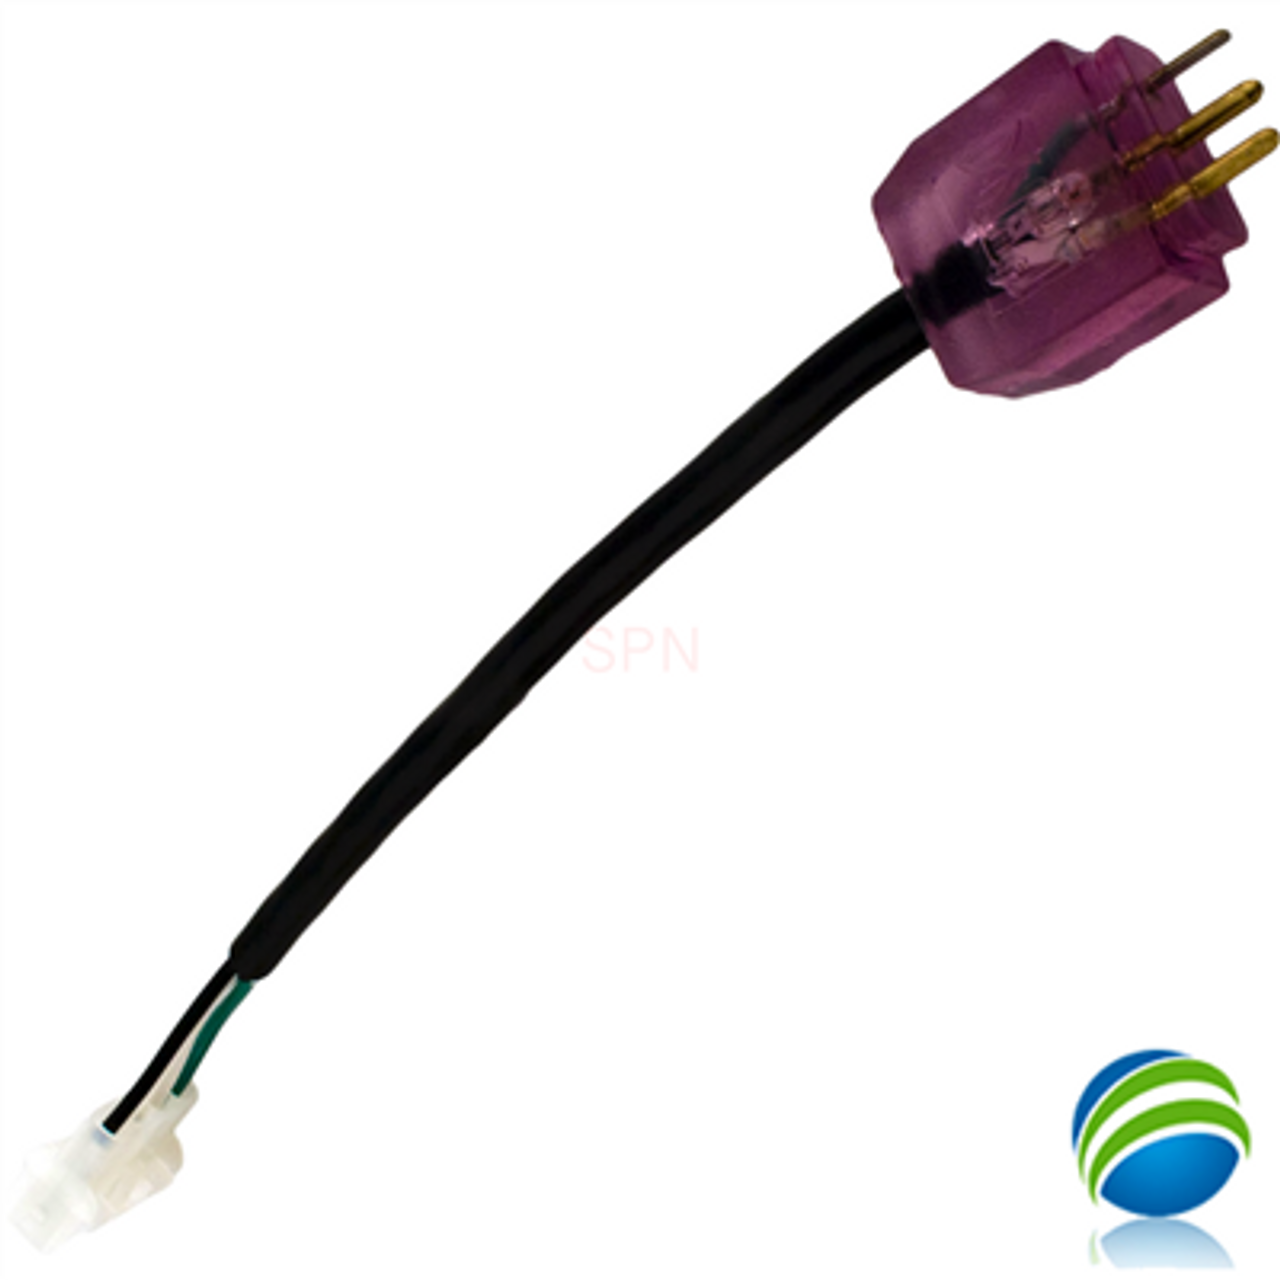 Blower Adapter Cord, 4 Pin AMP to MJJ, Violet, 6"